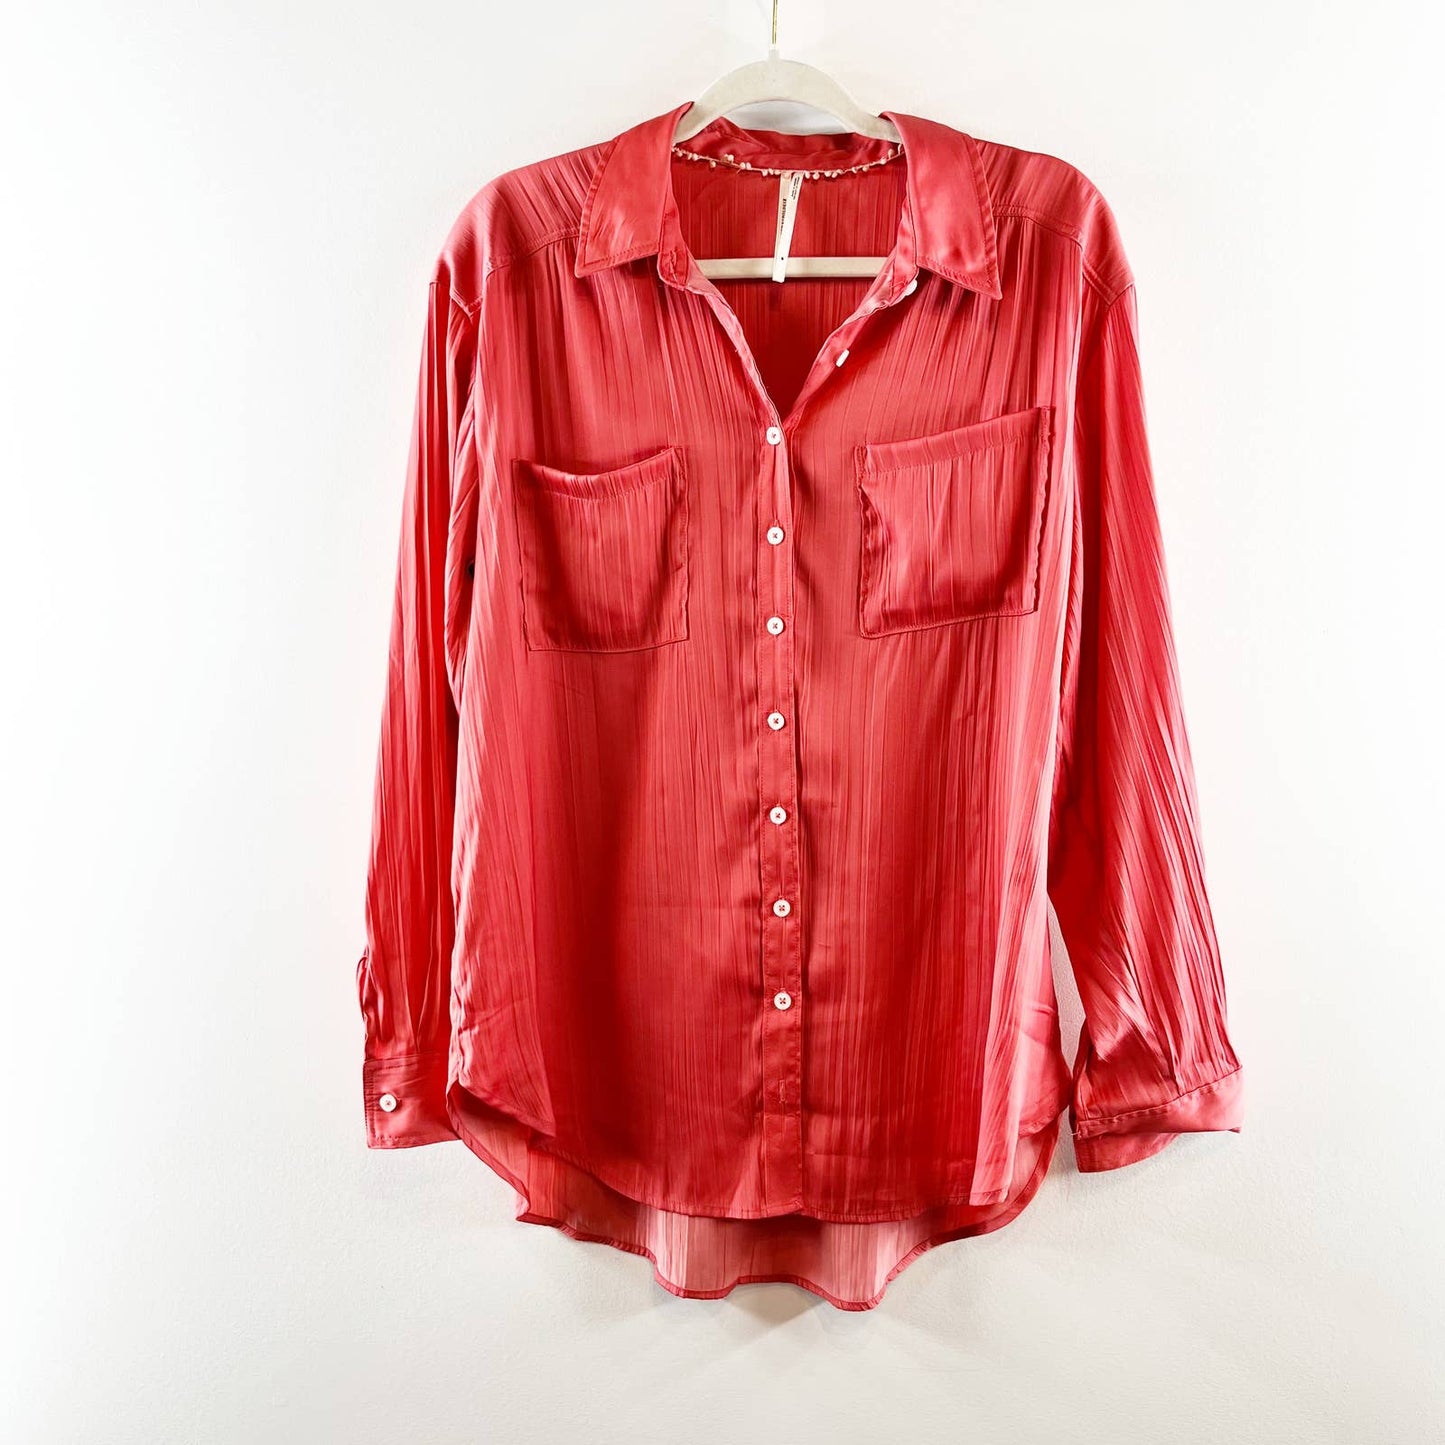 Anthropologie Button Down Collared Long Sleeve Blouse Top Pink Medium